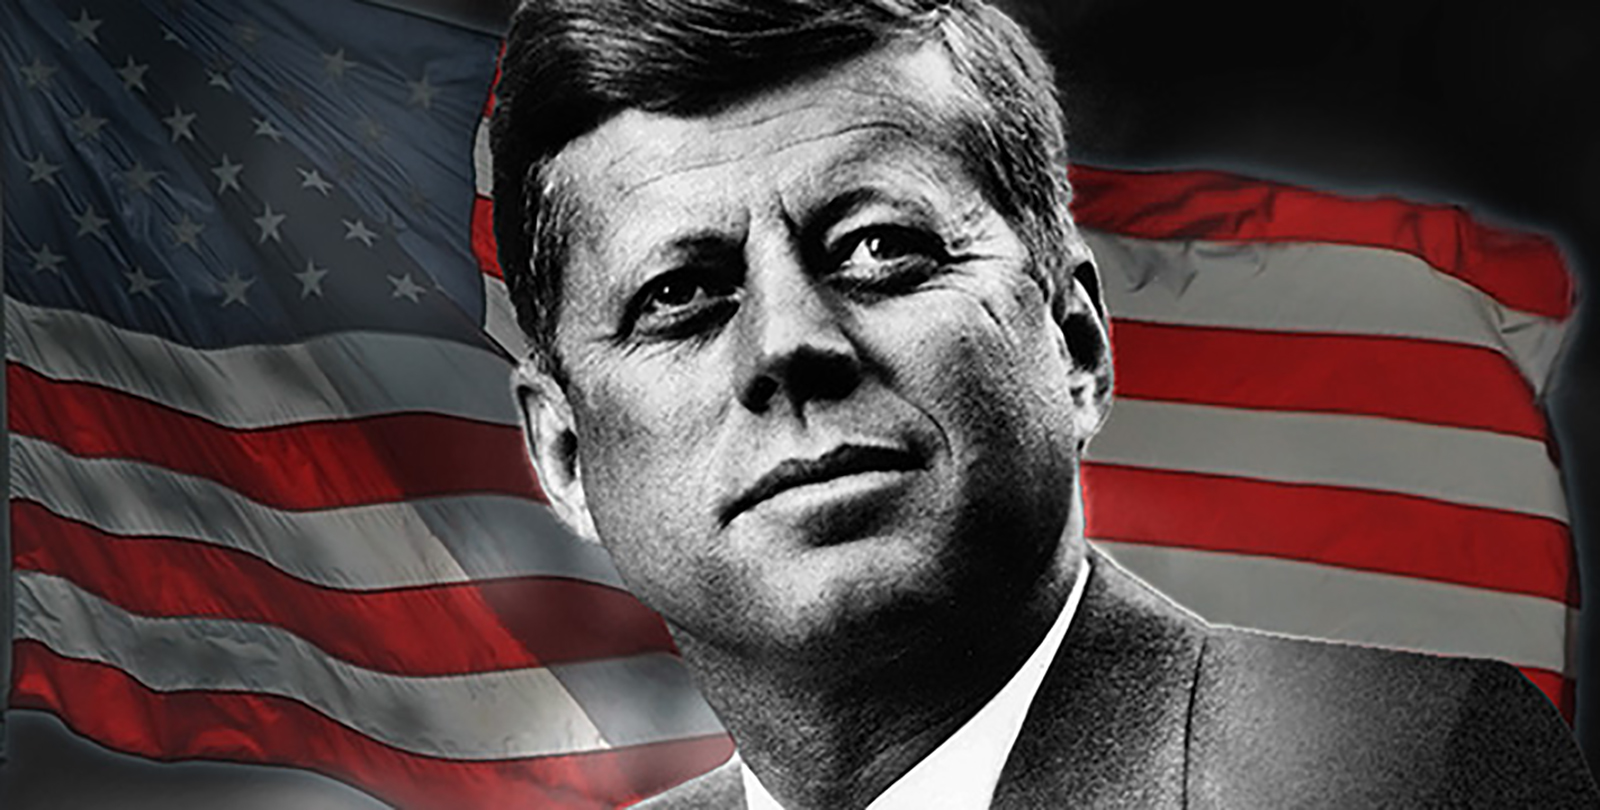 Black and white headshot of President John F. Kennedy with a colored waving American flag in the background